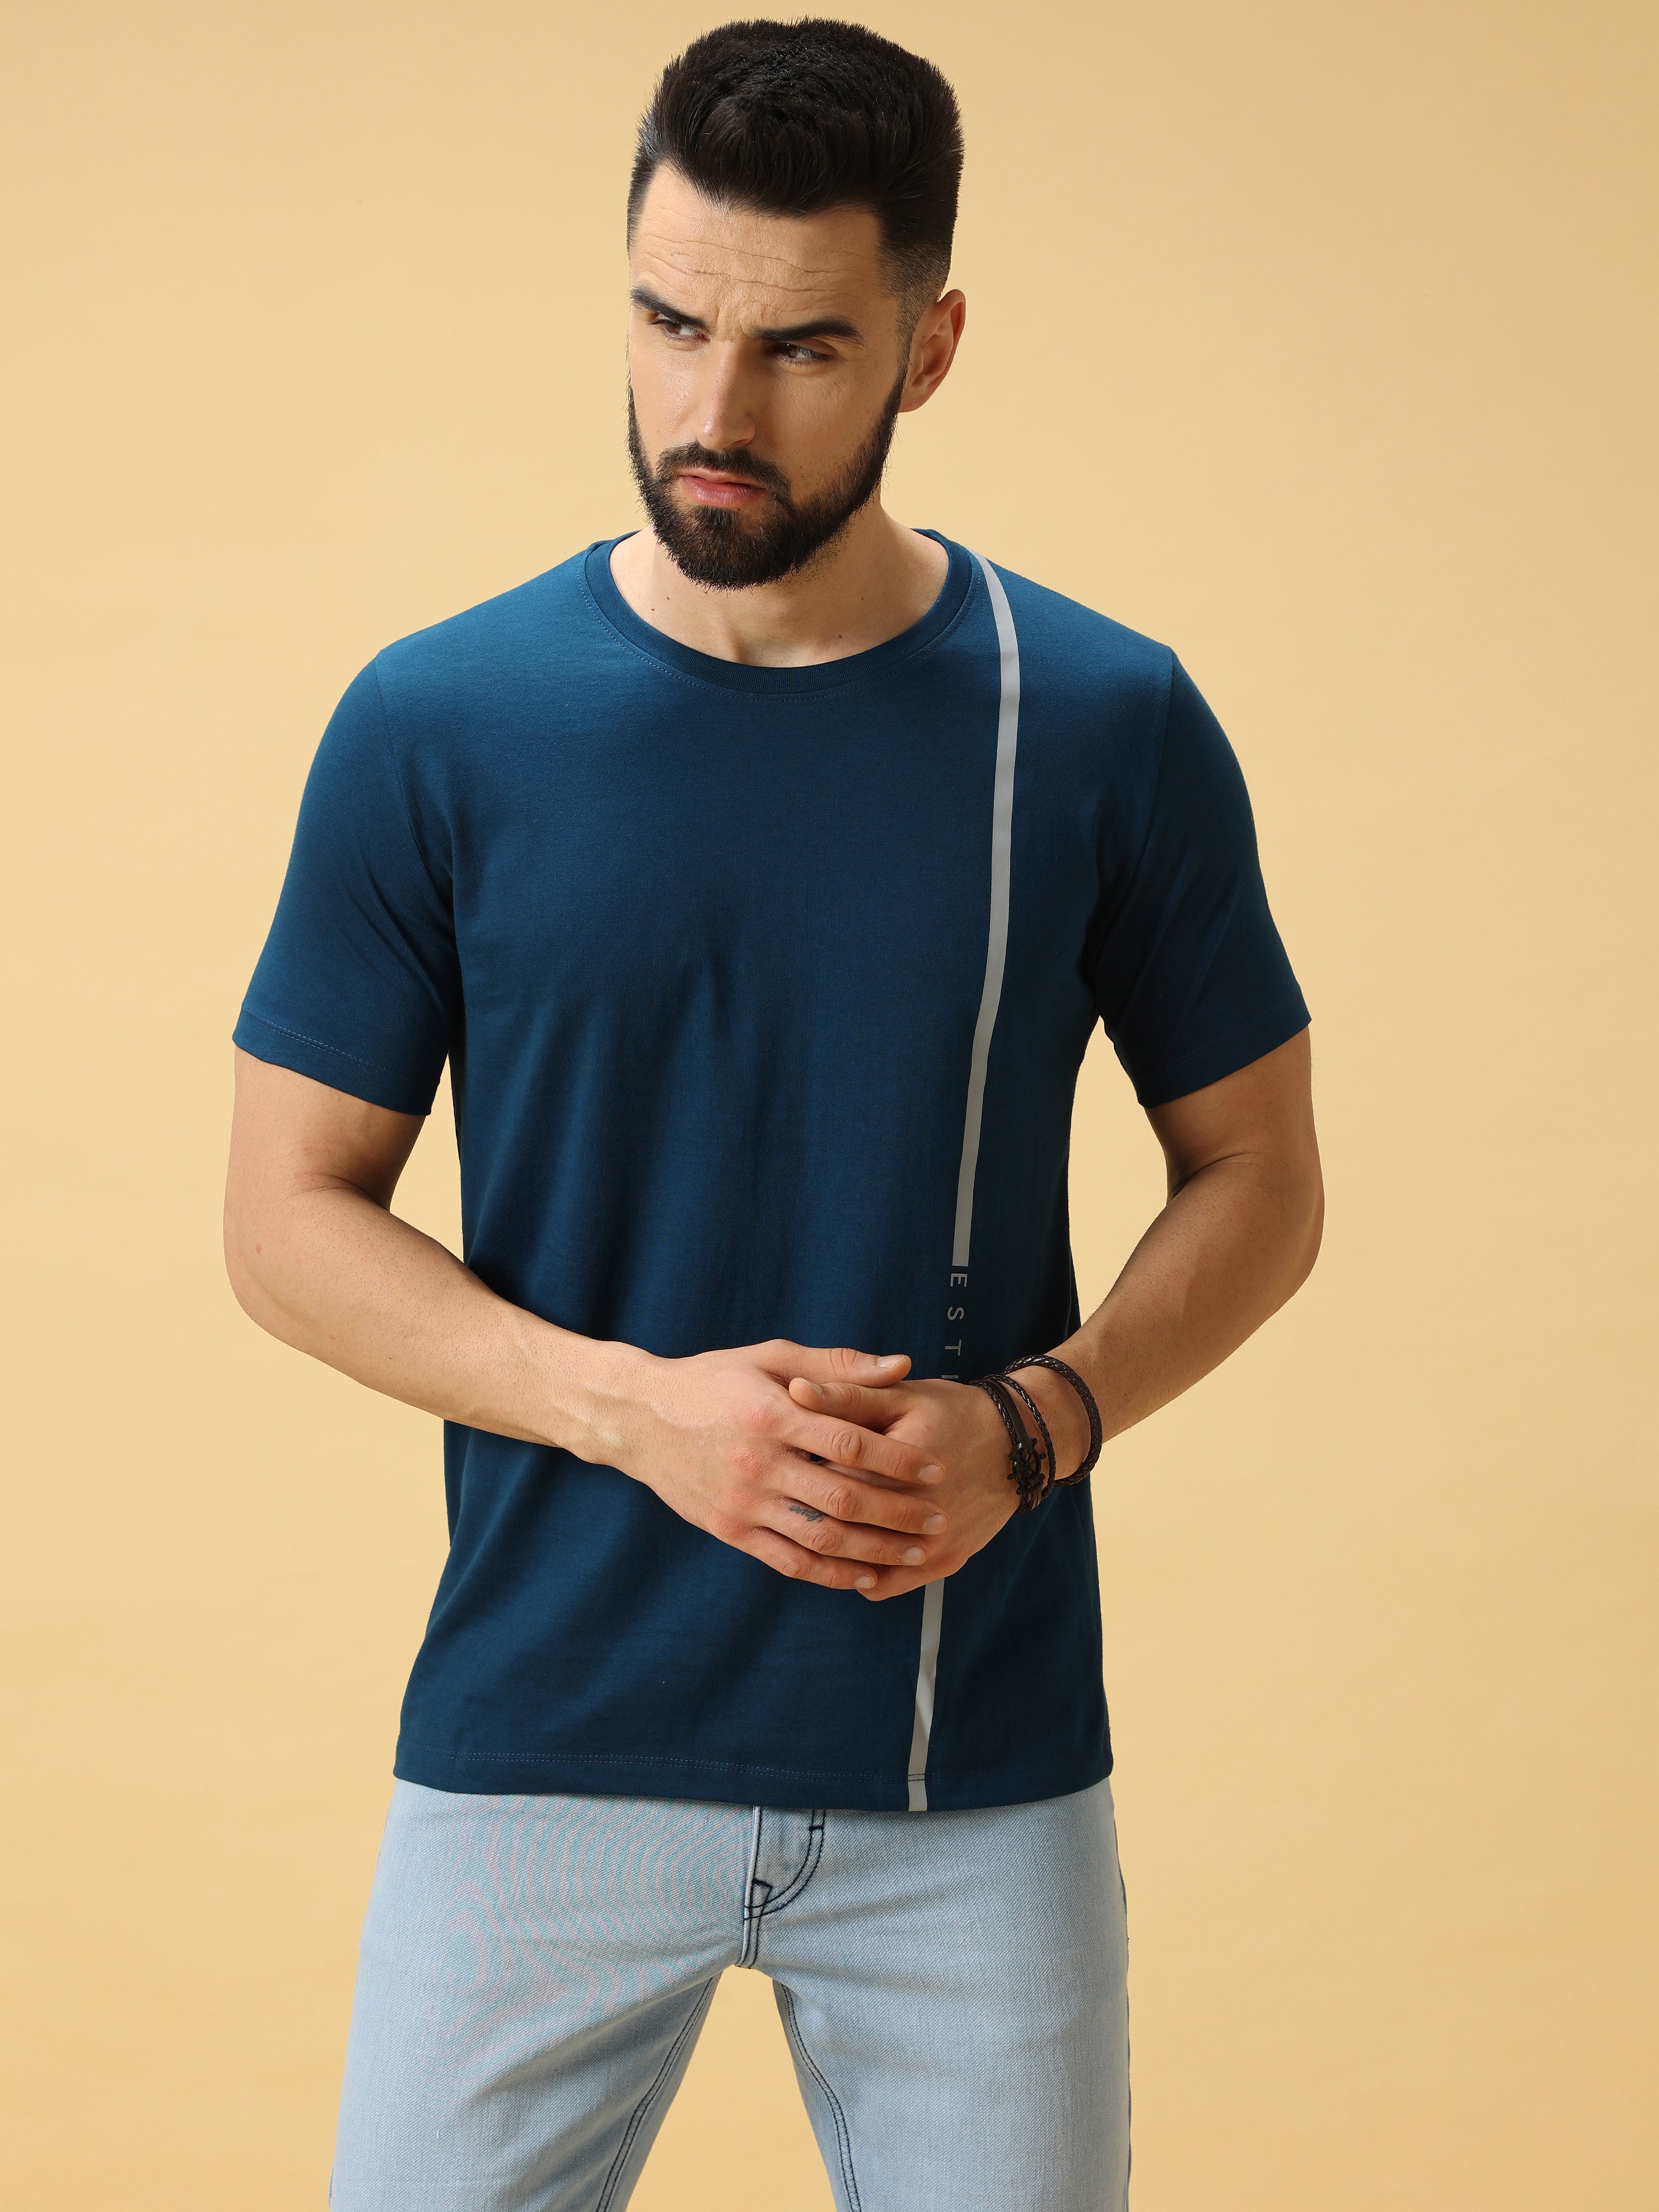 Side Full Grey Print Crew Neck T- Shirt shop online at Estilocus. This pure cotton printed T-shirt is a stylish go-to for laidback days. Cut in a comfy regular fit. • 100% Cotton knitted interlock 190GSM• Bio washed fabric• Round neck T-shirt • Half sleev